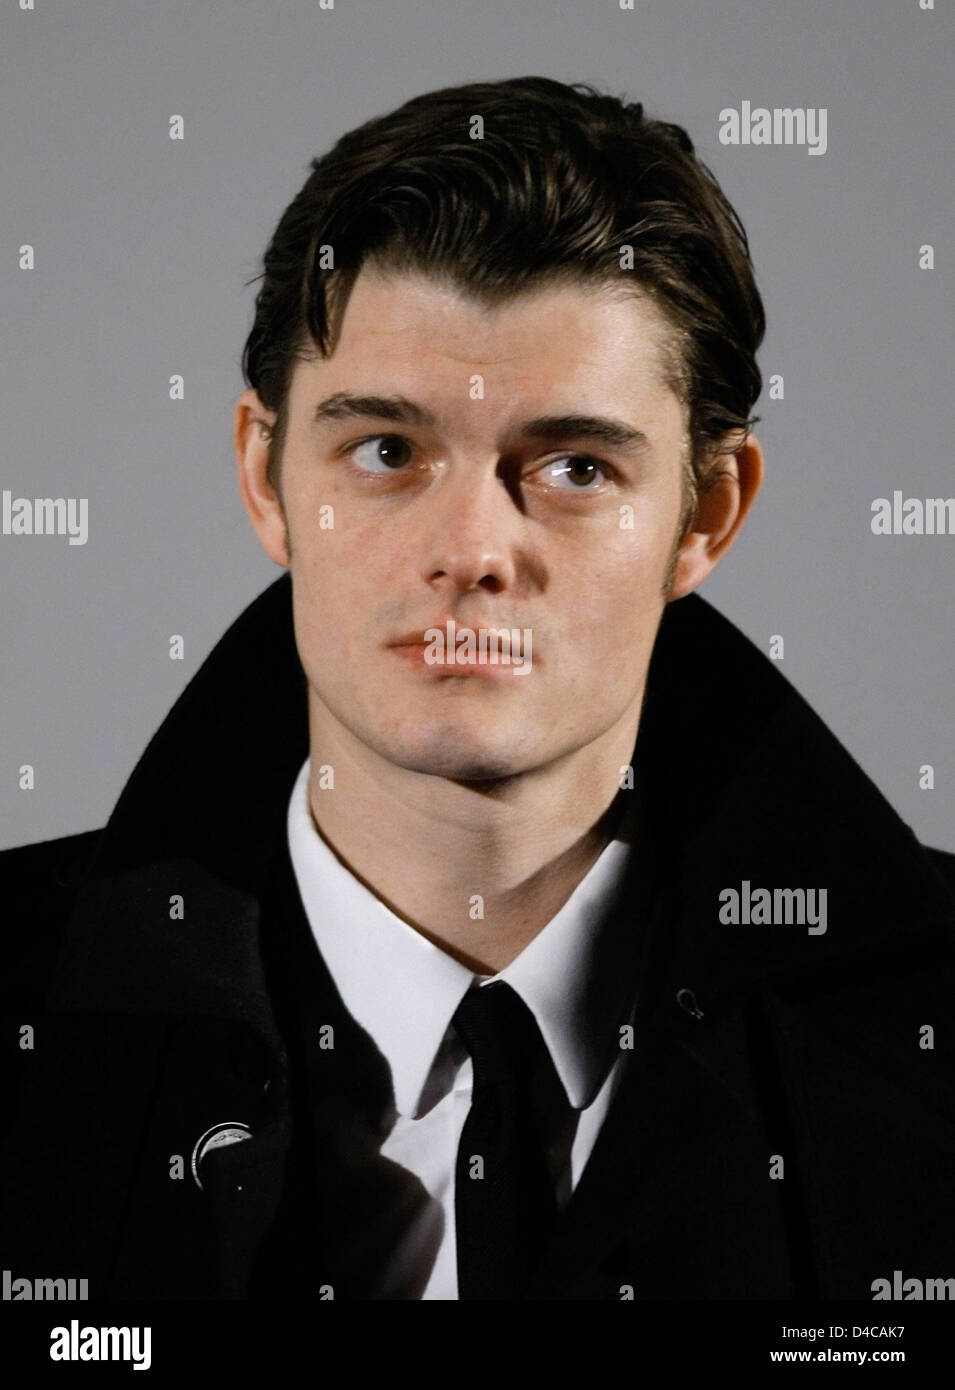 British actor Sam Riley, pictured after the premiere of 'Control' at the Kulturbrauerei's cinema in Berlin, Germany, 04 January 2008. The black-and-white biopic about Ian Curtis (1956-1980), lead singer of post-punk band Joy Division, opens at German cinemas on 10 January. Ian Curtis committed suicide in May 1980, shortly before turning 24. Photo: Soeren Stache Stock Photo